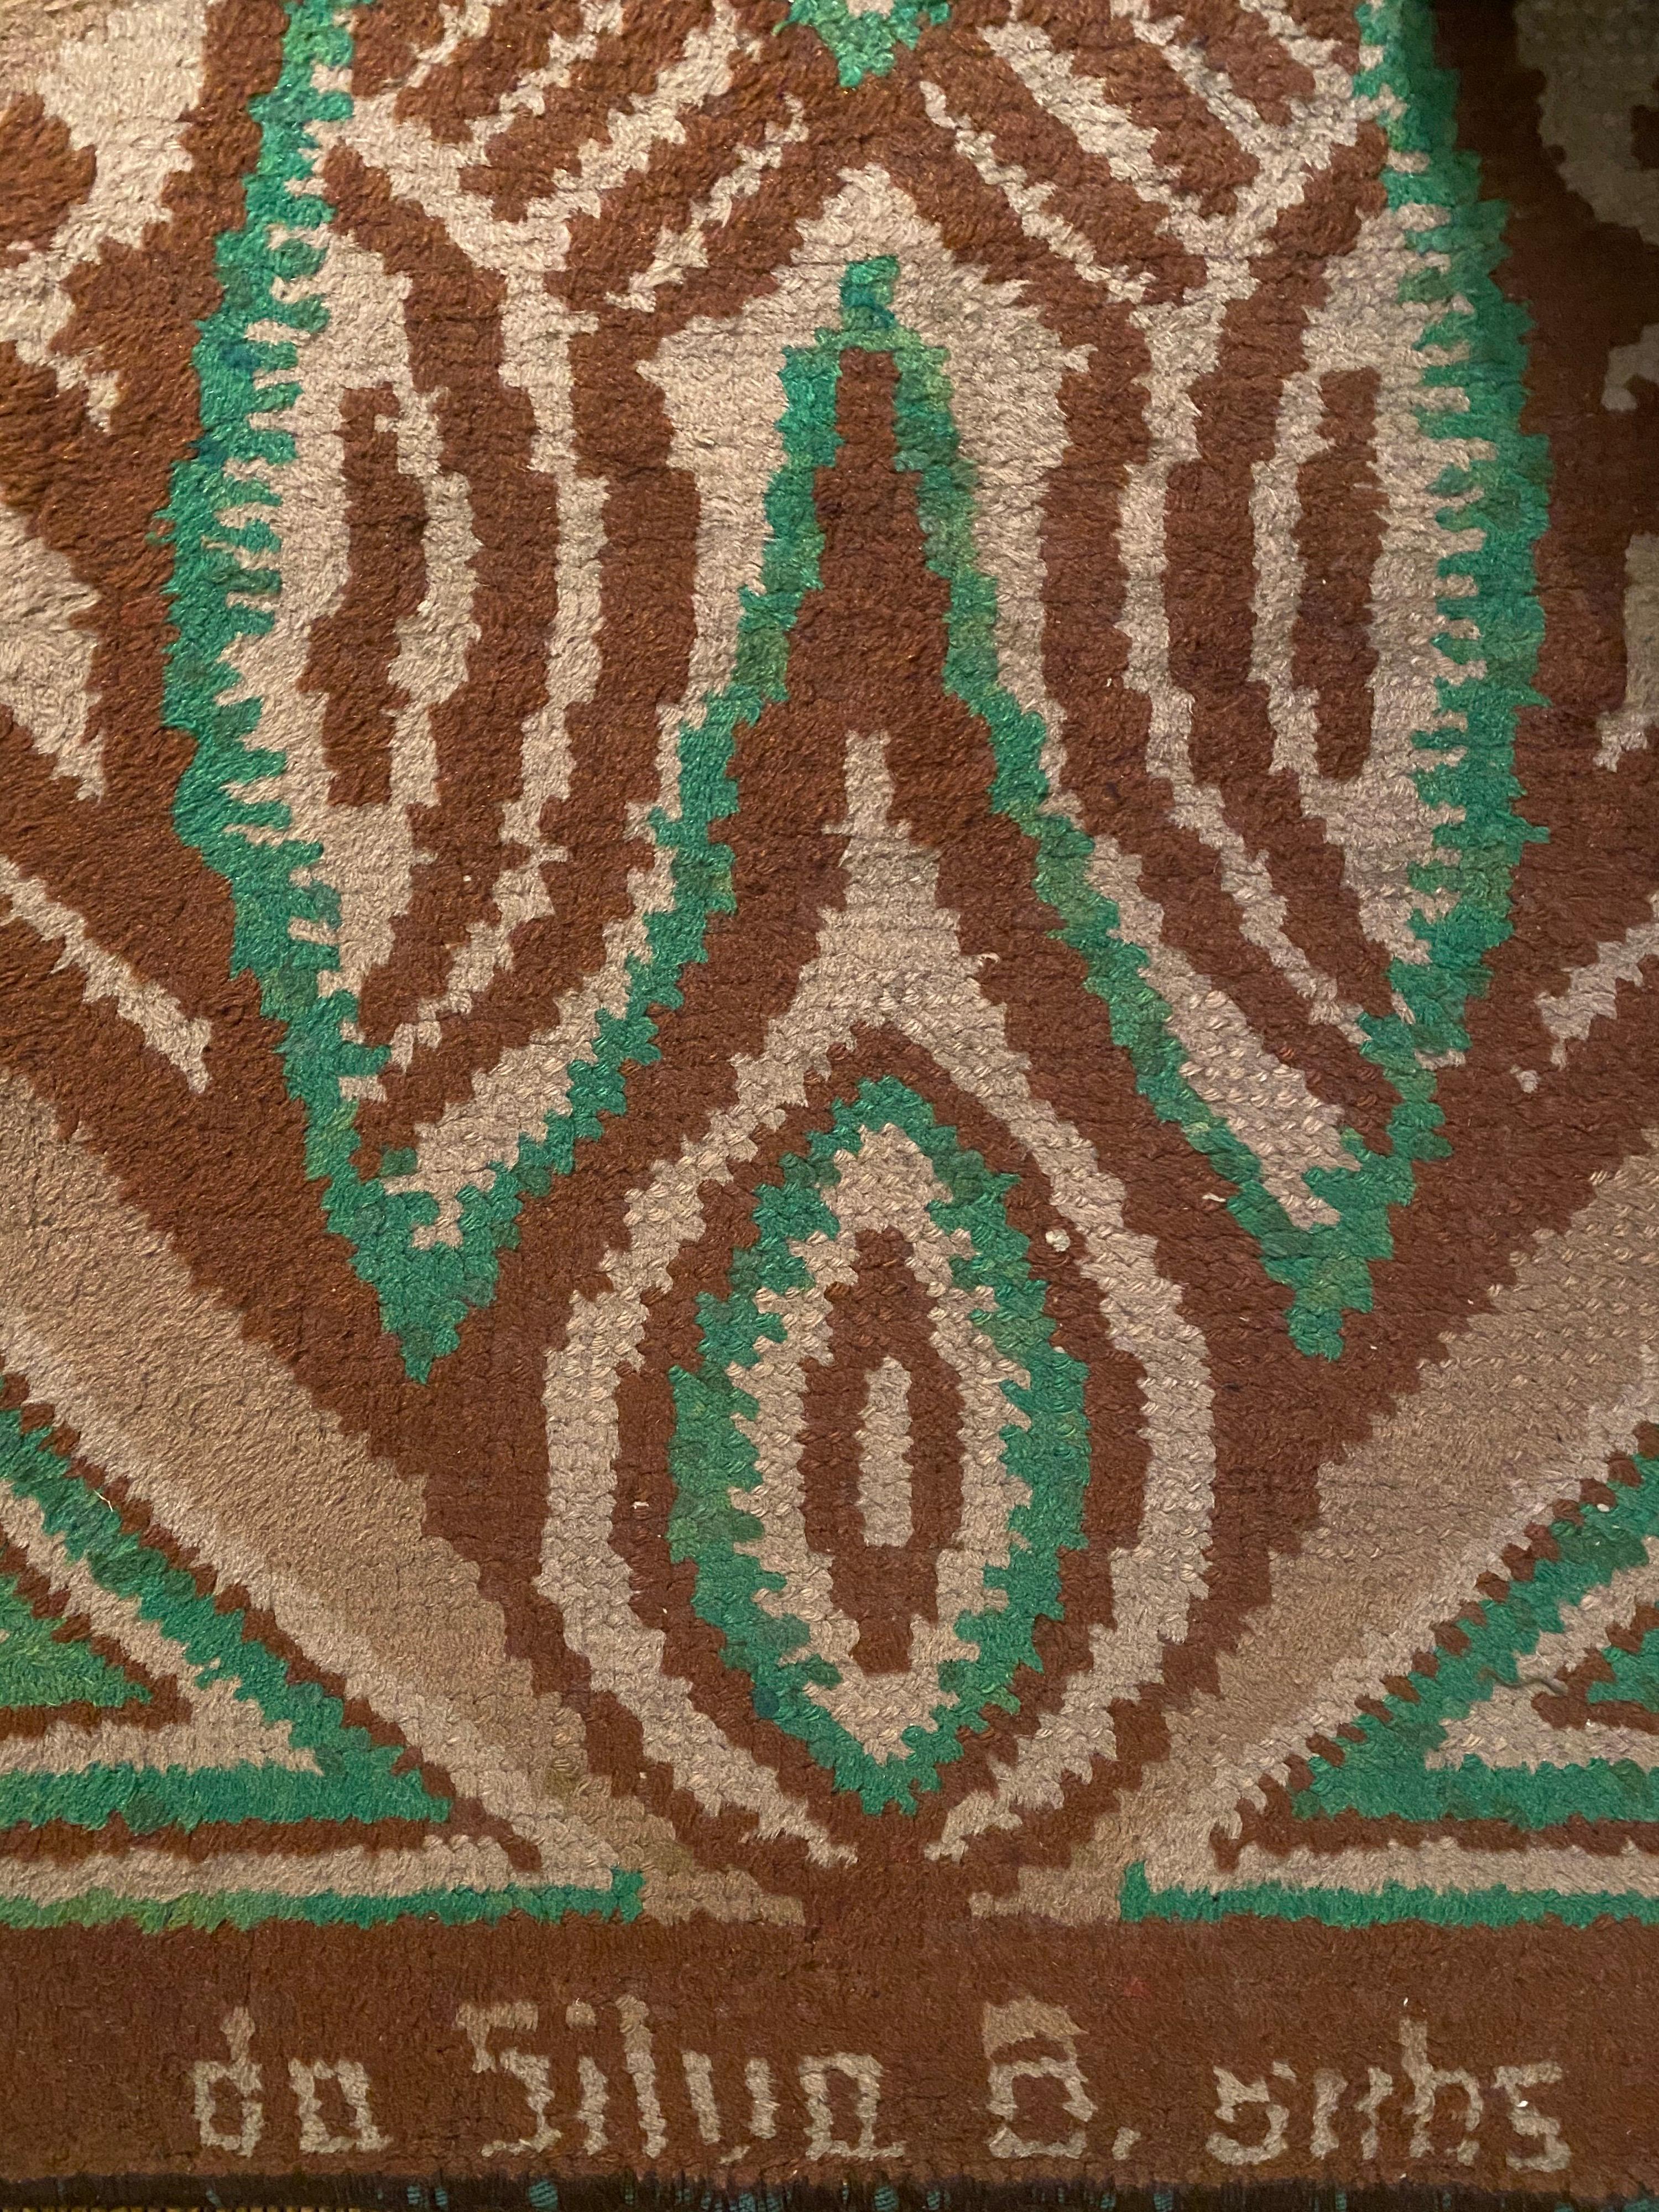 Rectuangular rug in wool with African inspired geometric motif designed by Ivan da Silva Bruhns in 1930 circa. The rug presents the artist's signature at the bottom that reads 